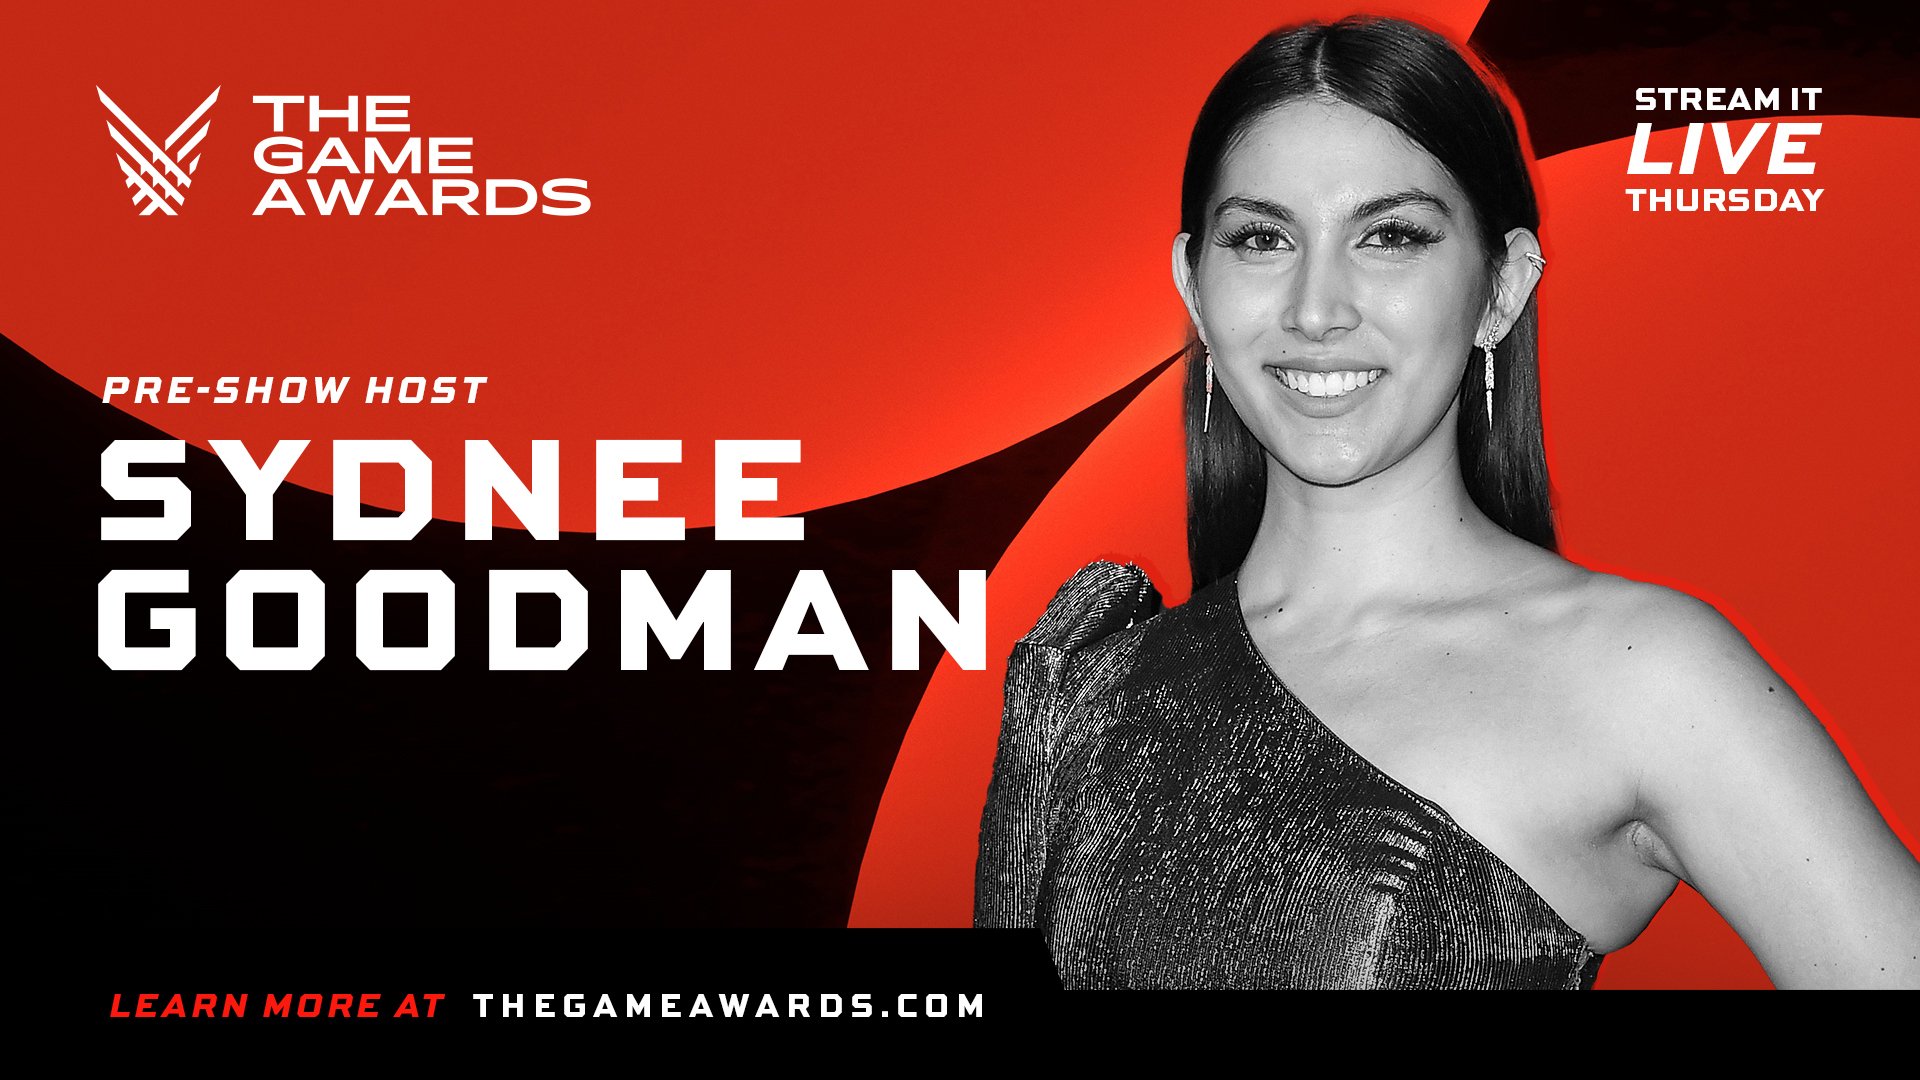 The Game Awards on X: Don't miss #TheGameAwards pre-show live on Thursday,  with your host @sydsogood - who returns to welcome you to a special night  to celebrate video games!  /